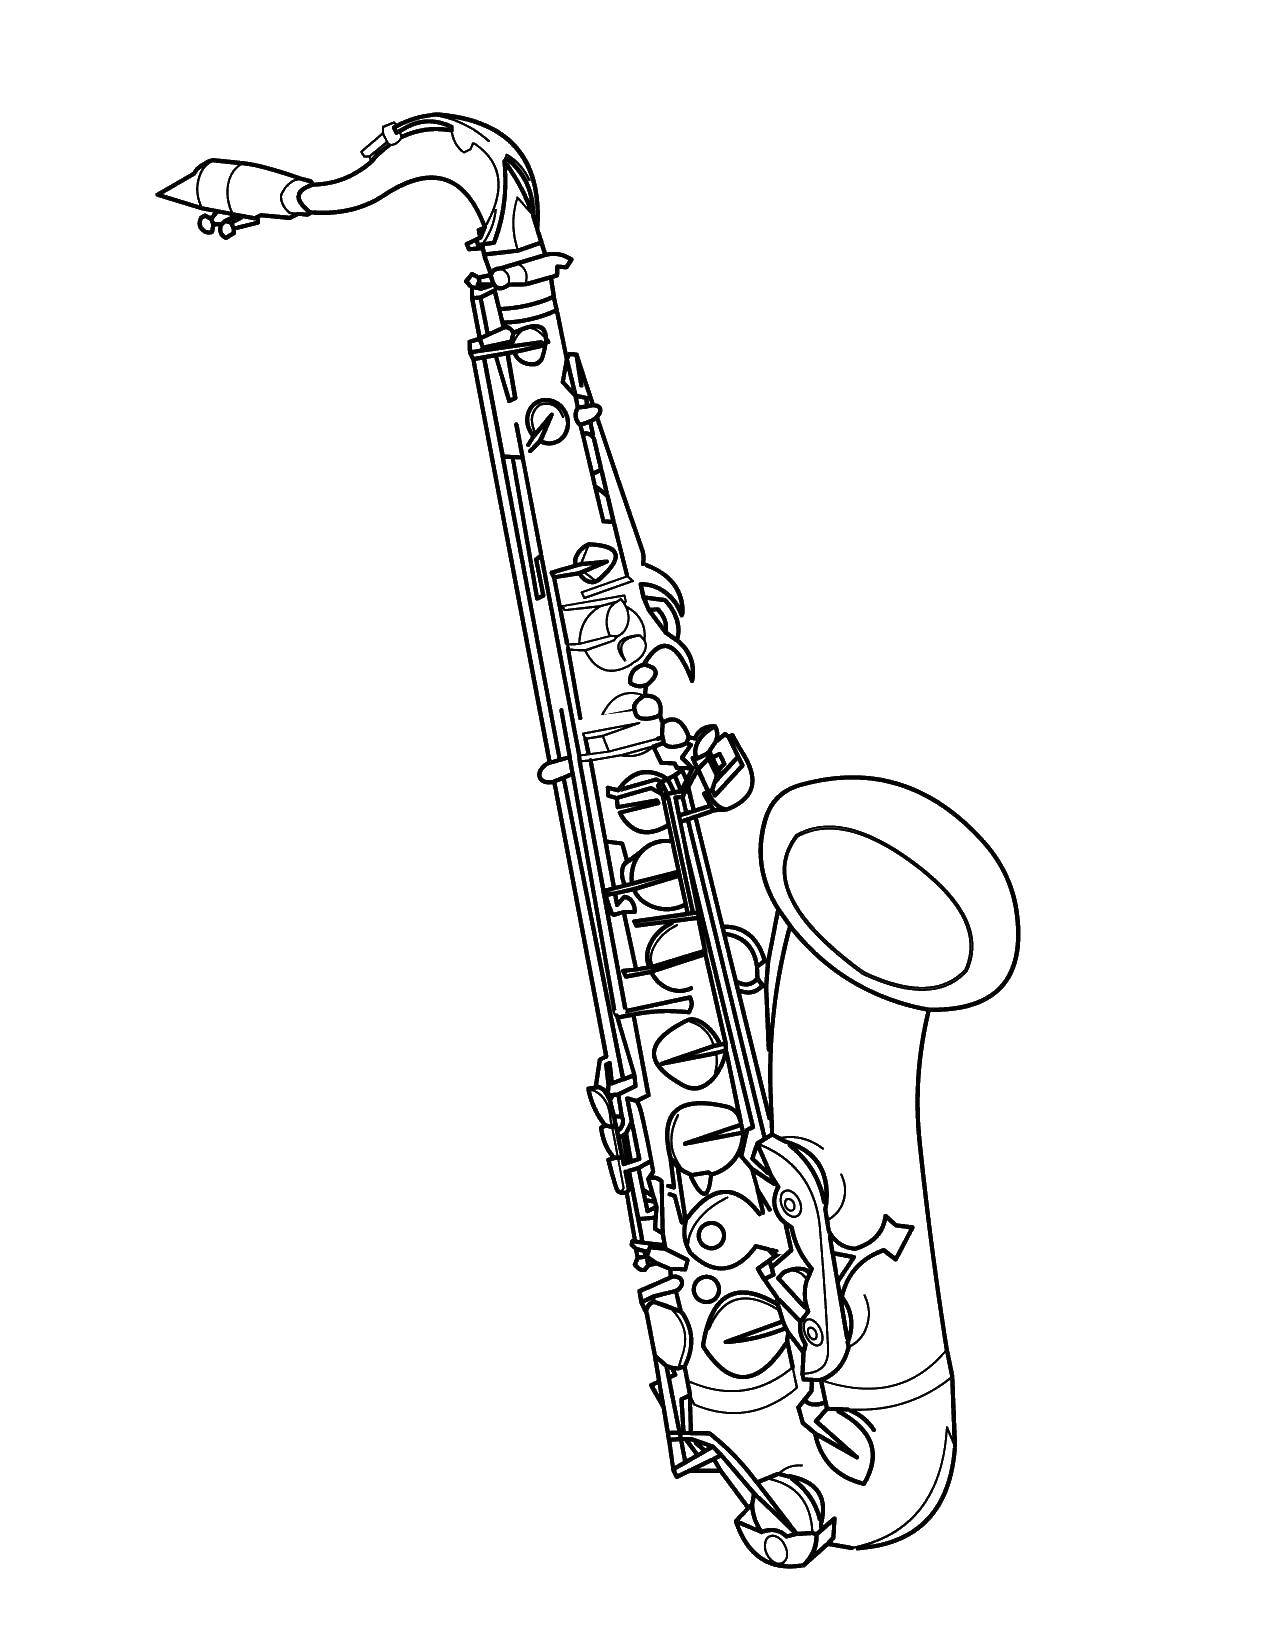 Coloring Saxophone. Category Music. Tags:  Music, instrument, musician, note.